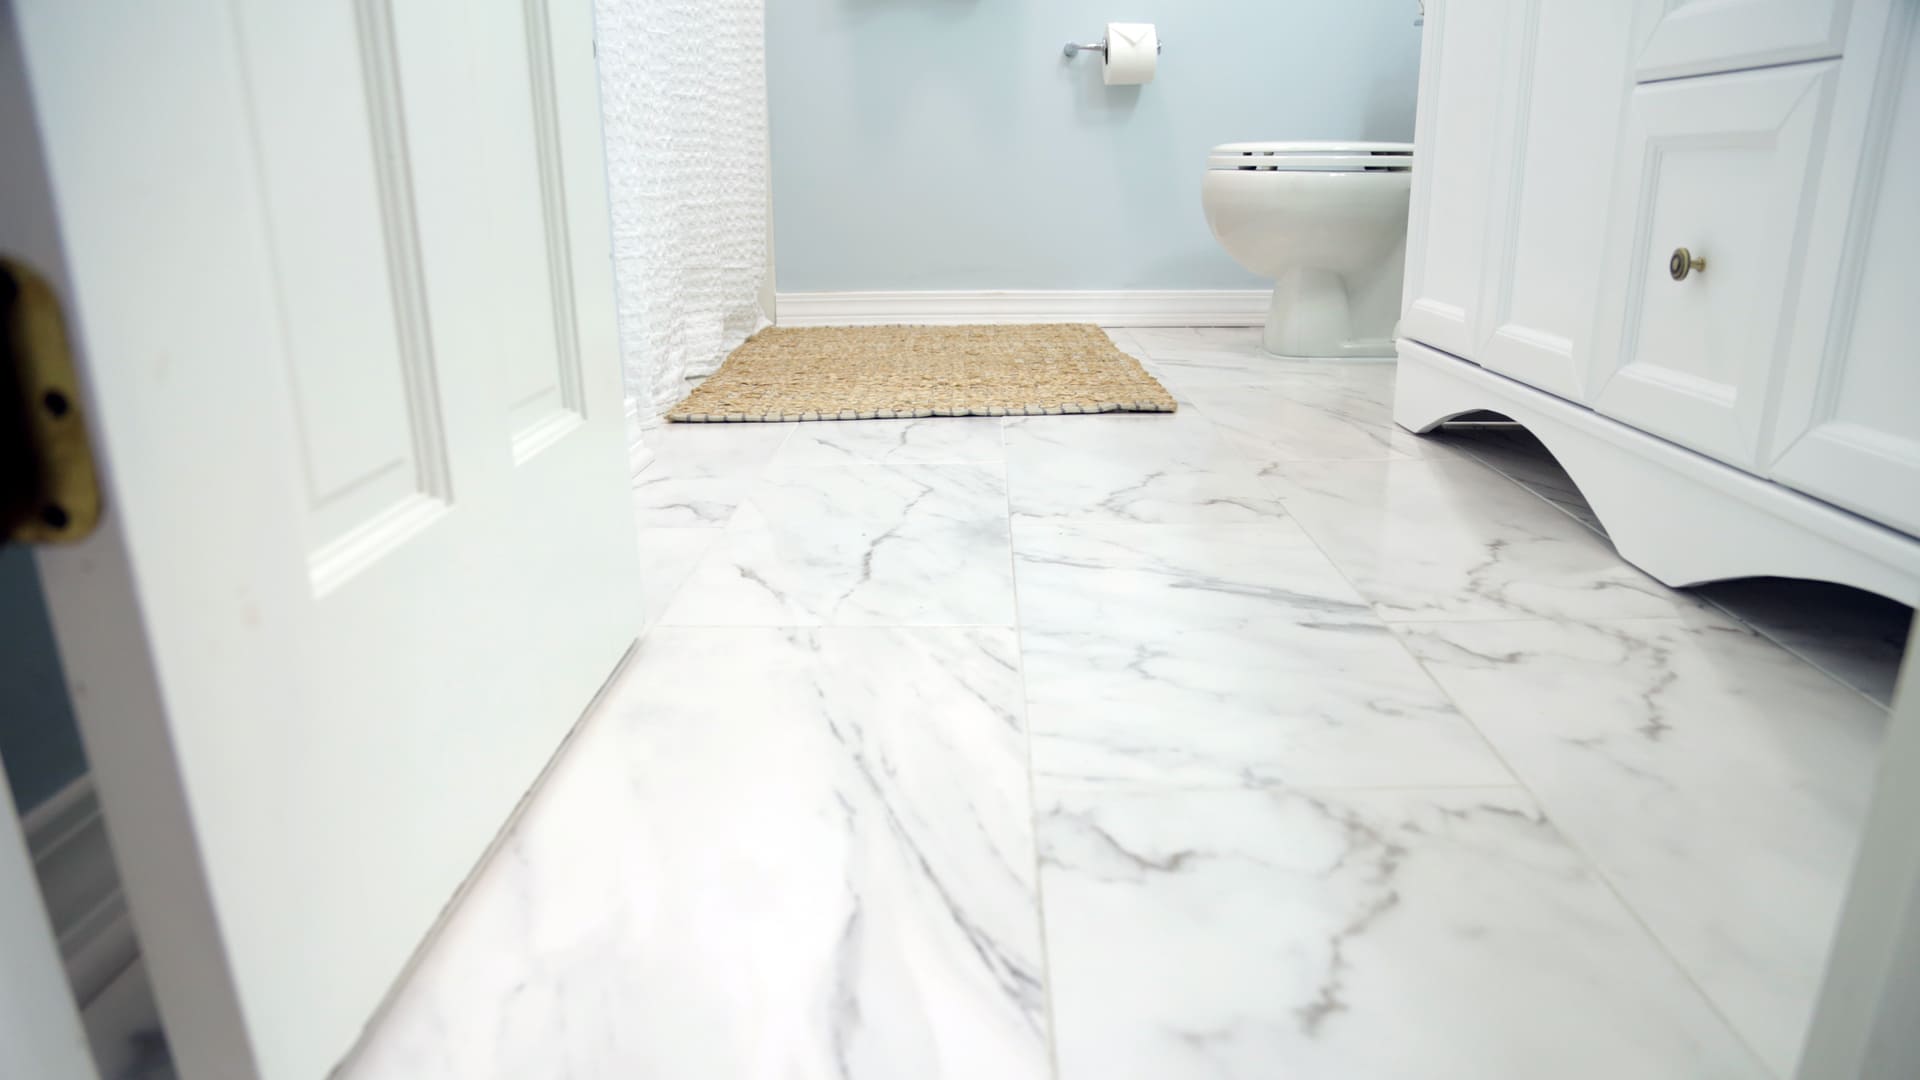 How To Lay Ceramic Tile On A Floor, How To Put Ceramic Tile On The Floor